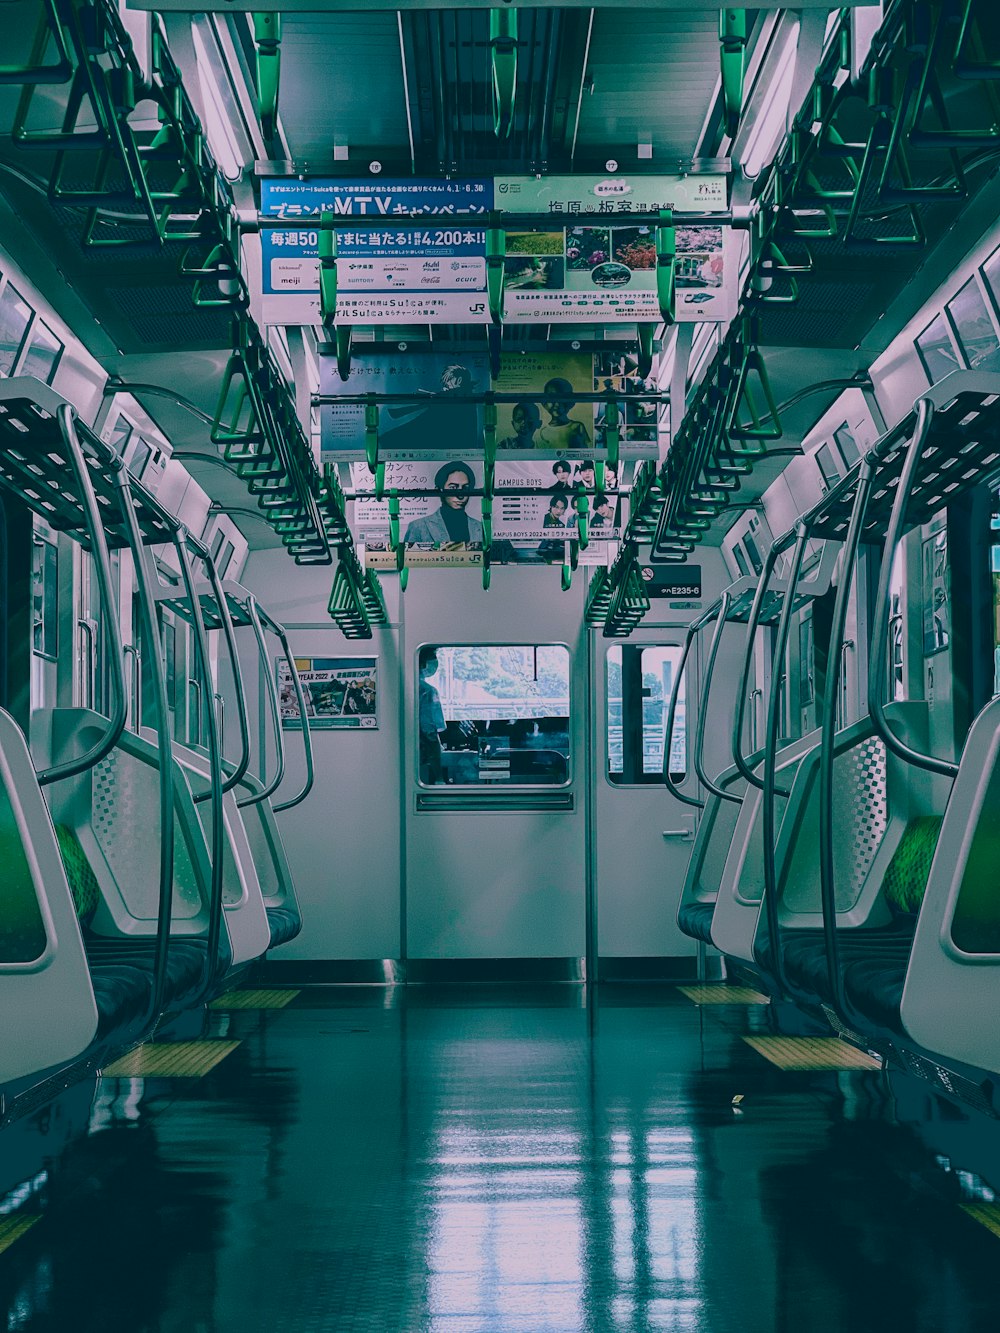 the inside of a subway car with green trim